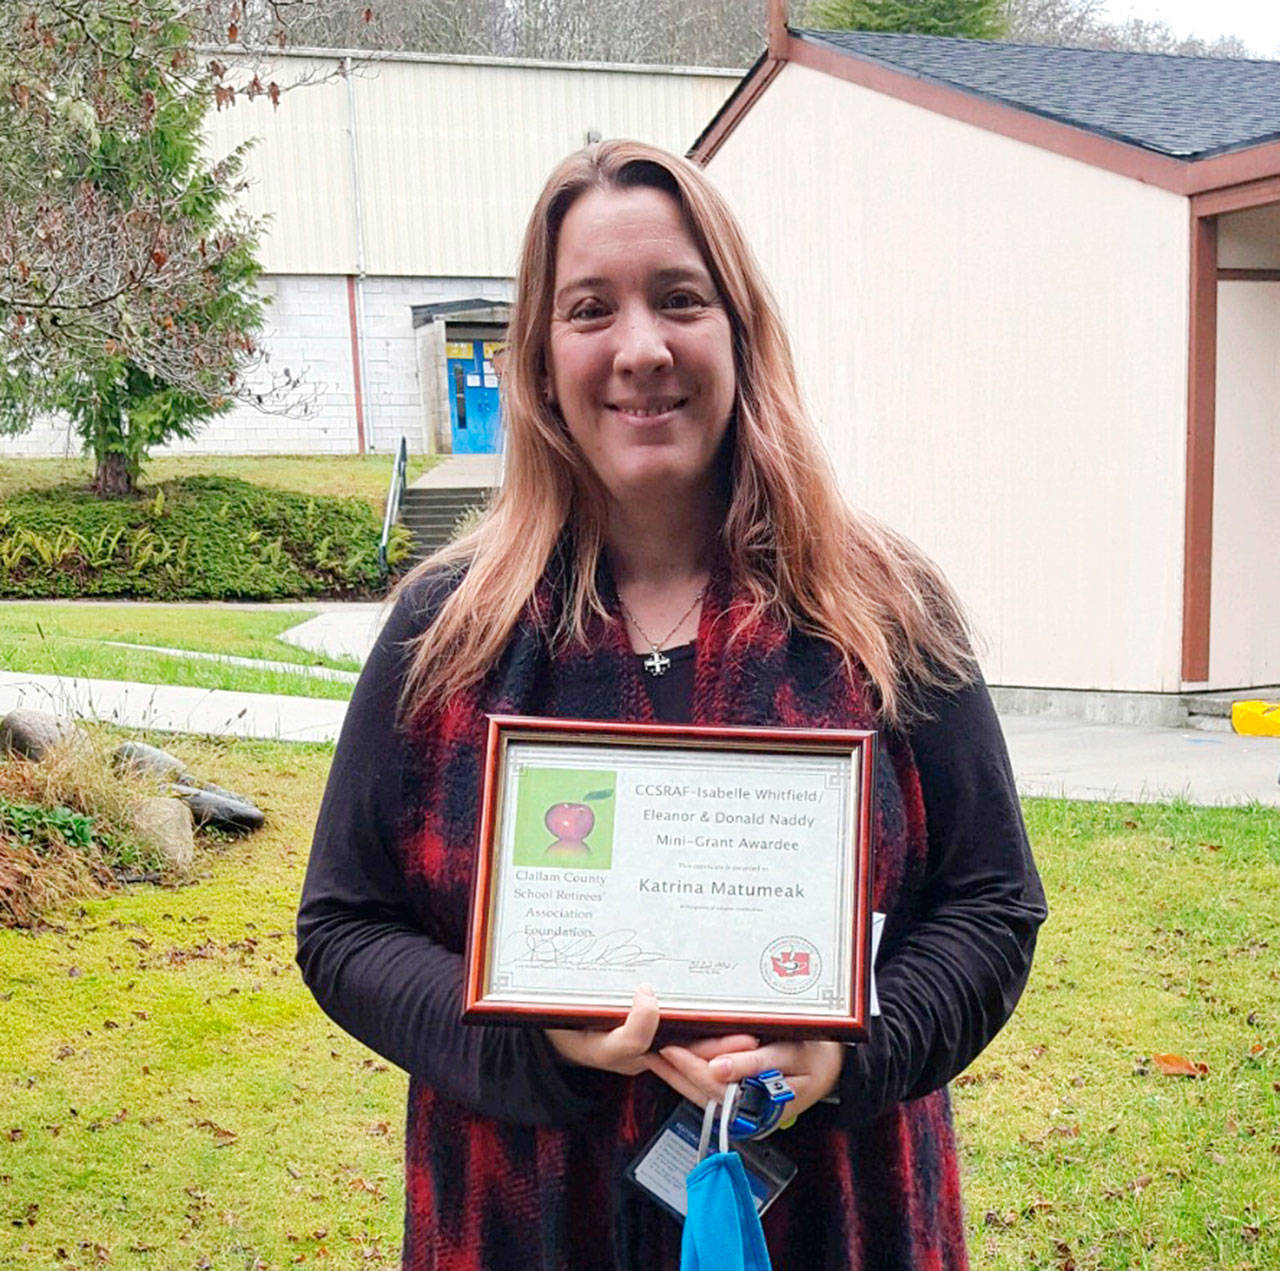 Katrina Matumeak, a fourth-grade teacher in the Crescent School District in Port Angeles, received a $500 grant from the Clallam County School Retirees’ Association’s Isabel Whitfield/Naddy Classroom Mini-Grants program. Submitted photo